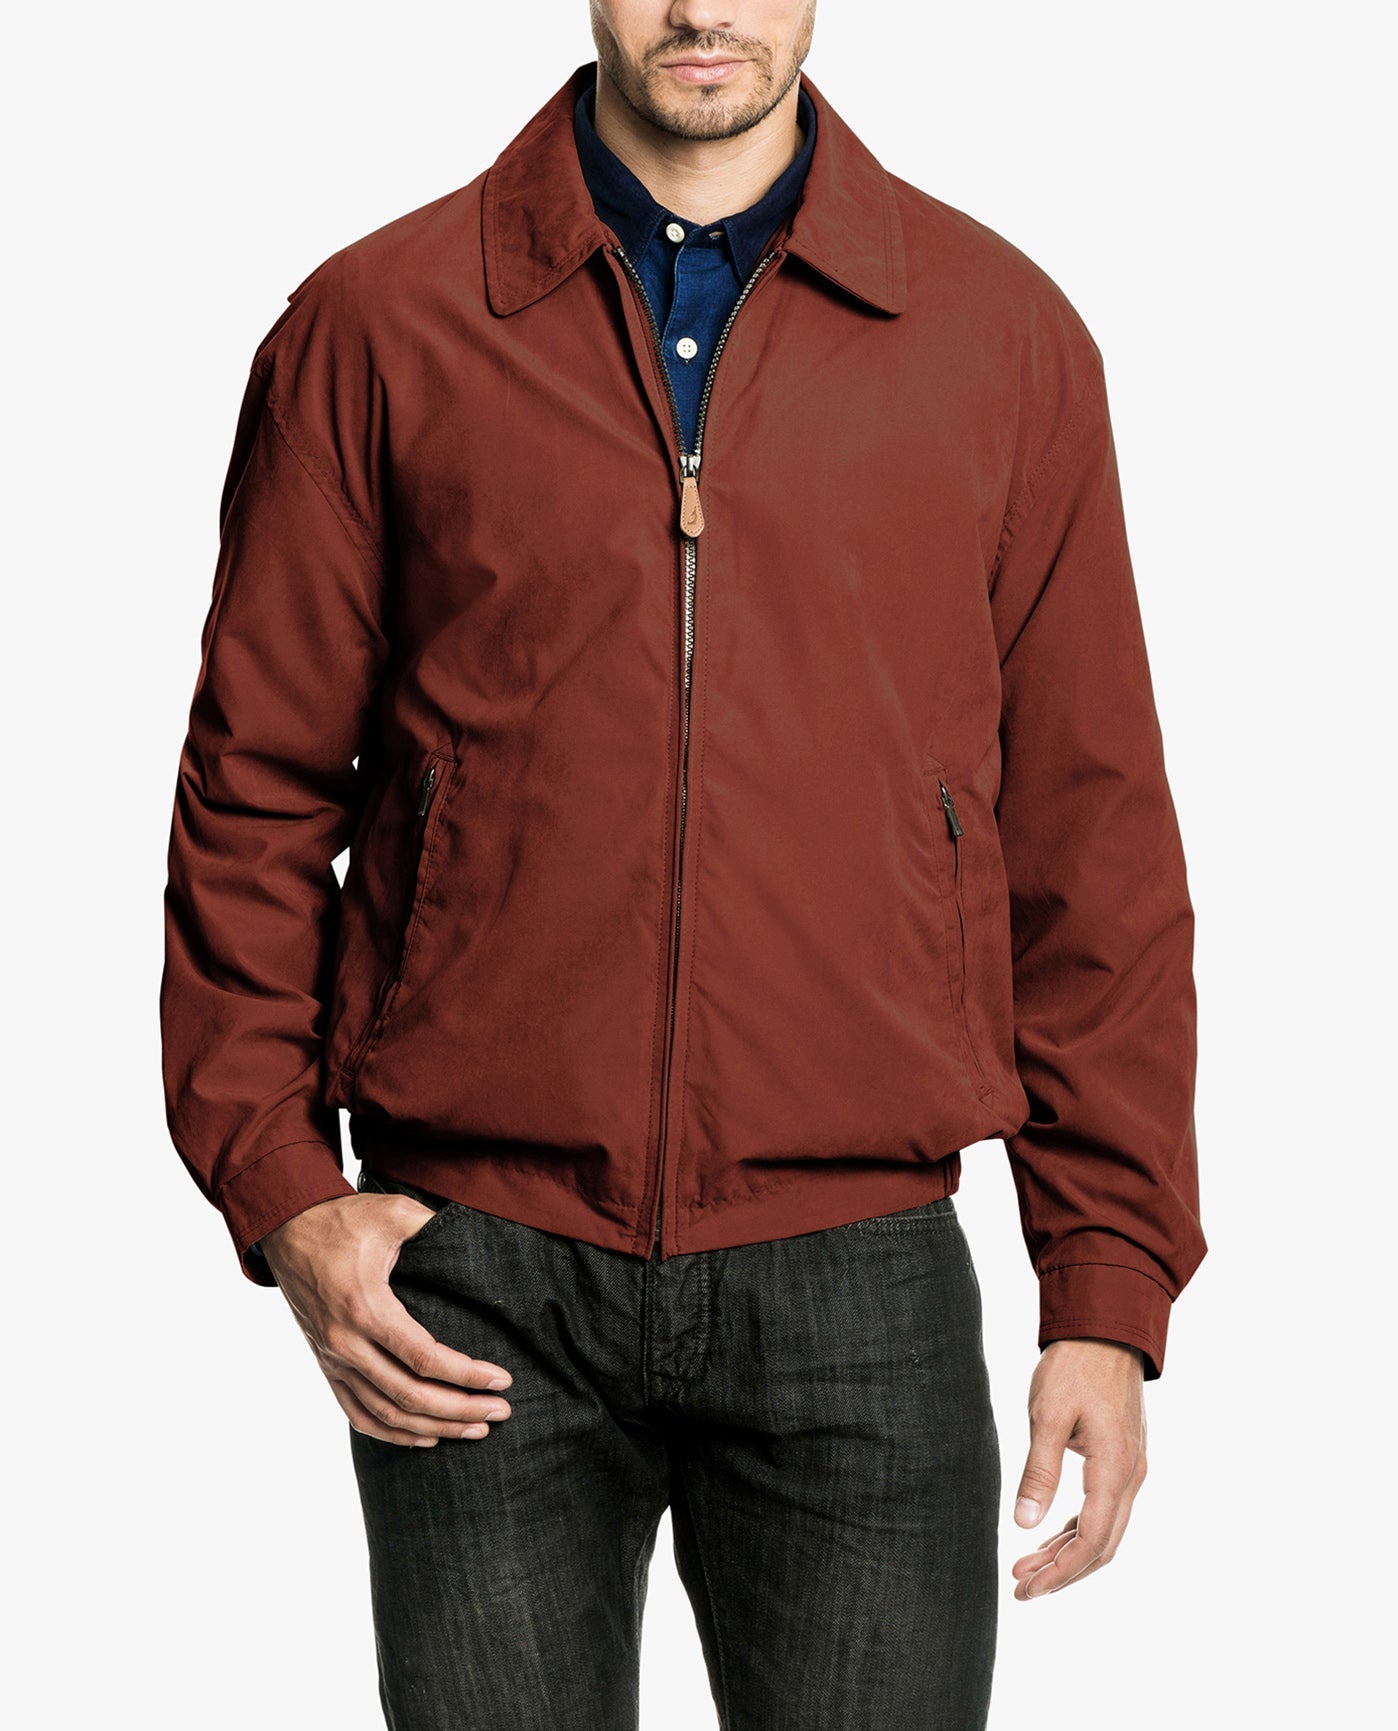 FRONT VIEW OF LIGHT WEIGHT ZIP FRONT GOLF JACKET | CHILI